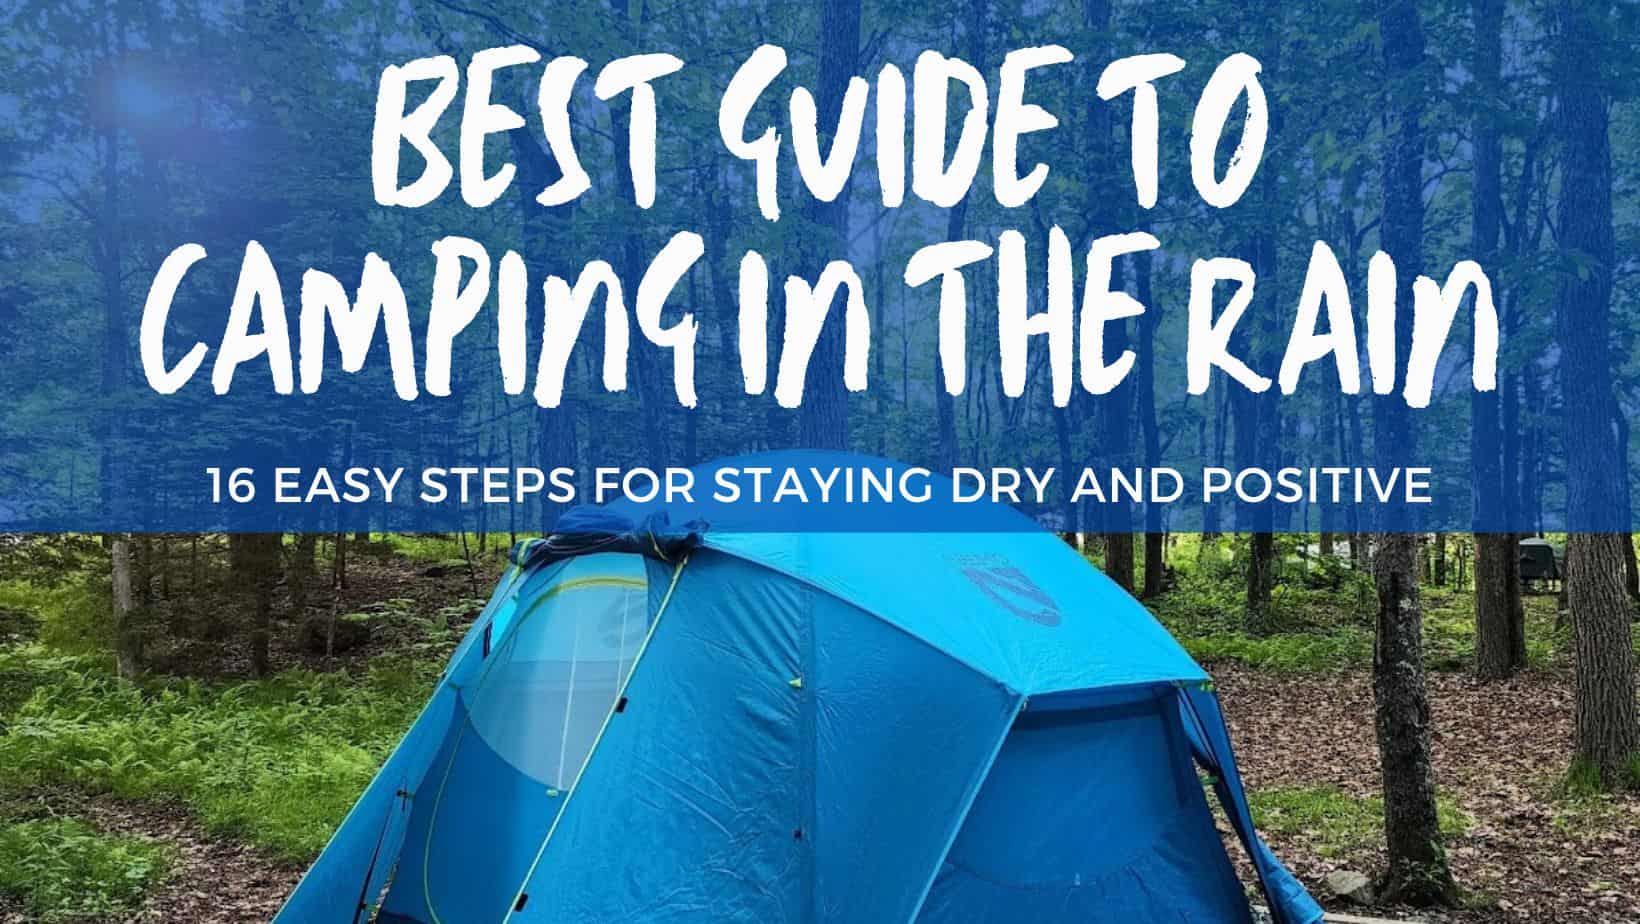 A Guide to Camping in the Rain: 16 Super Easy Steps to Stay Dry and ...